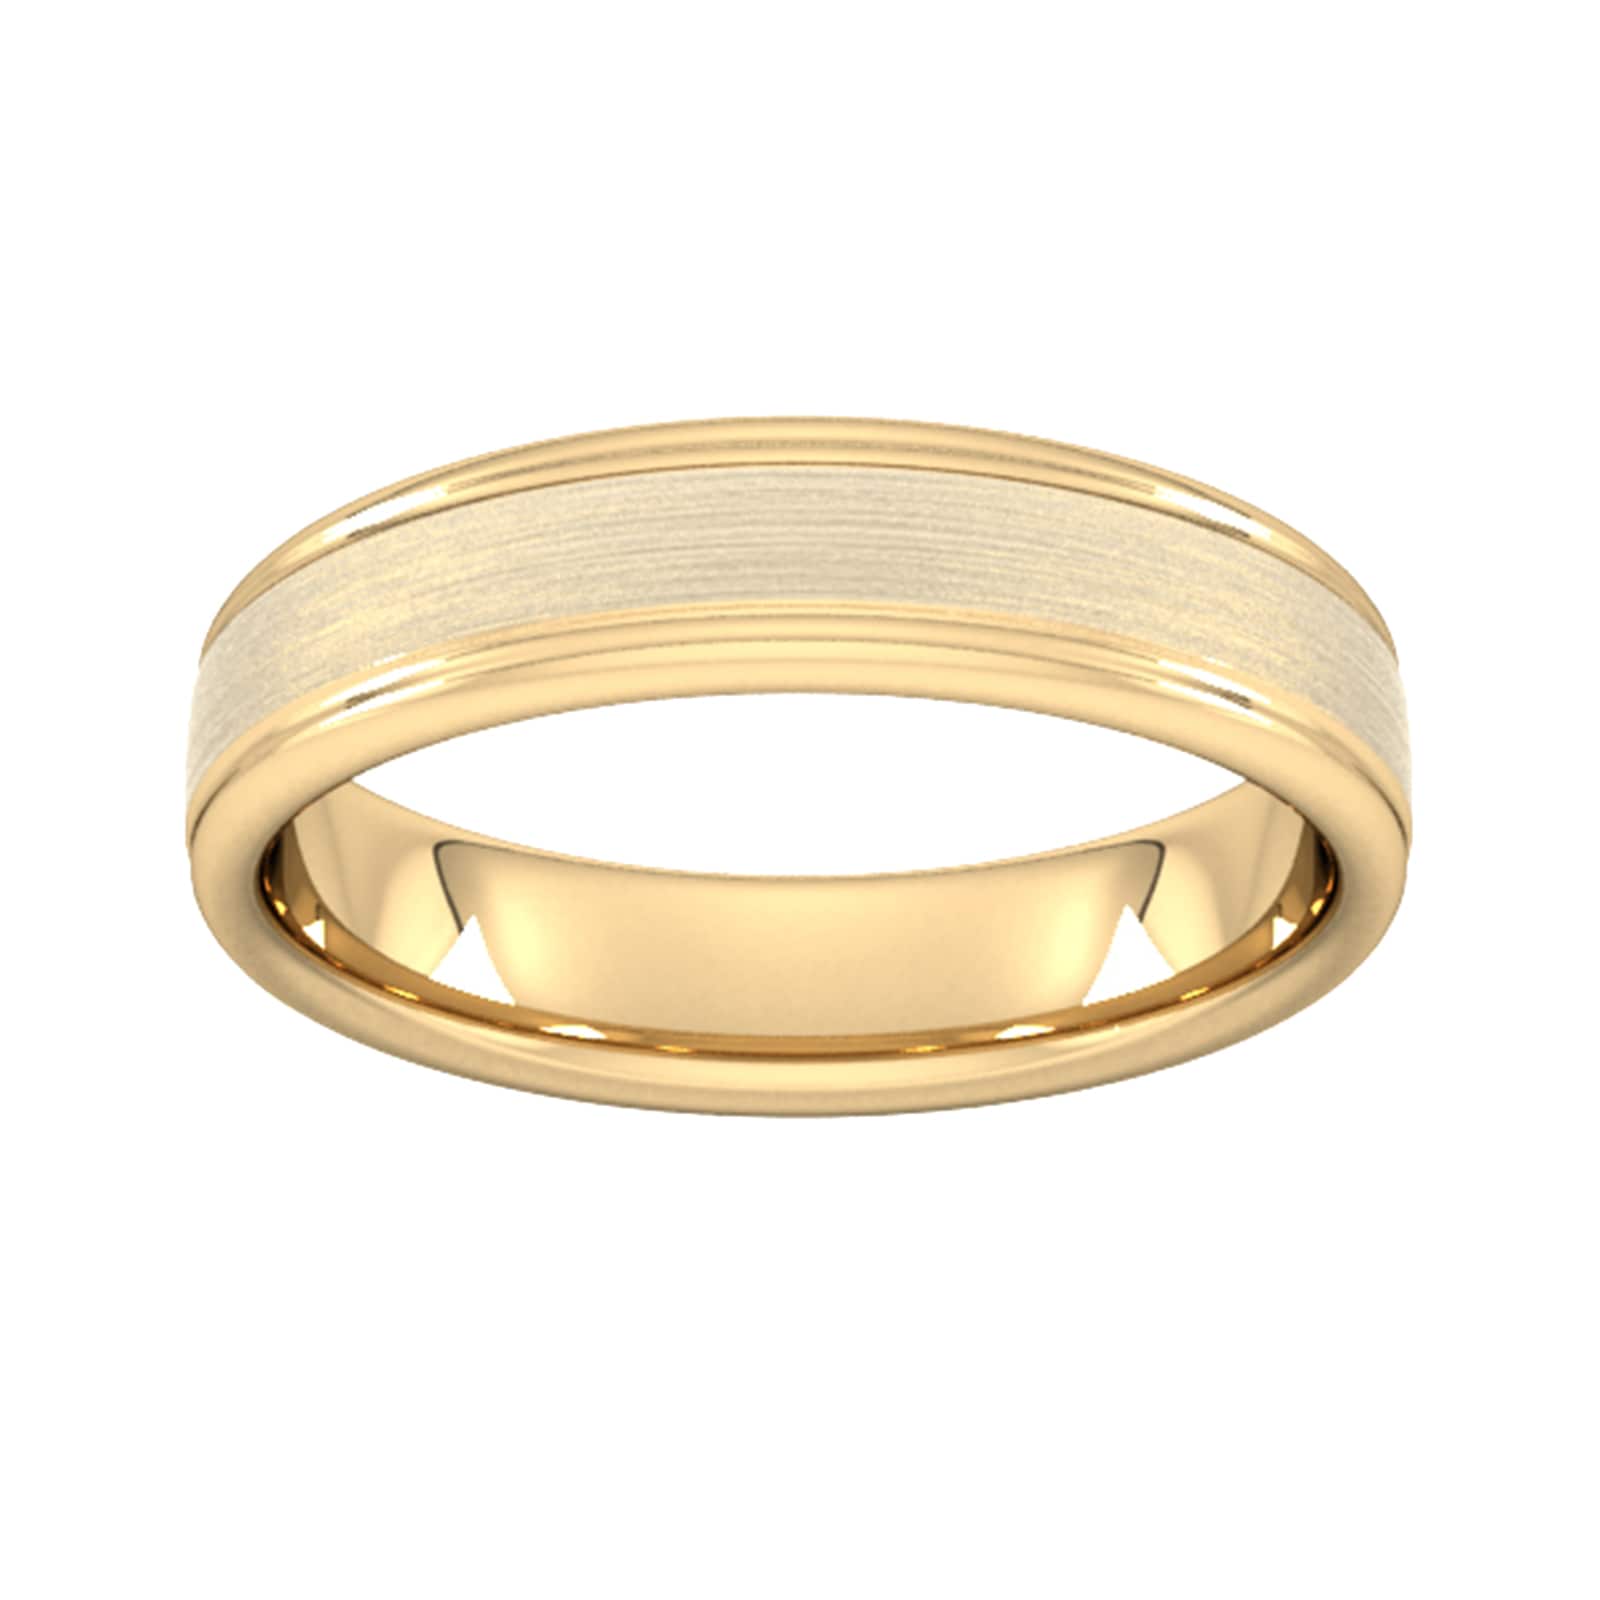 5mm Slight Court Extra Heavy Matt Centre With Grooves Wedding Ring In 18 Carat Yellow Gold - Ring Size X